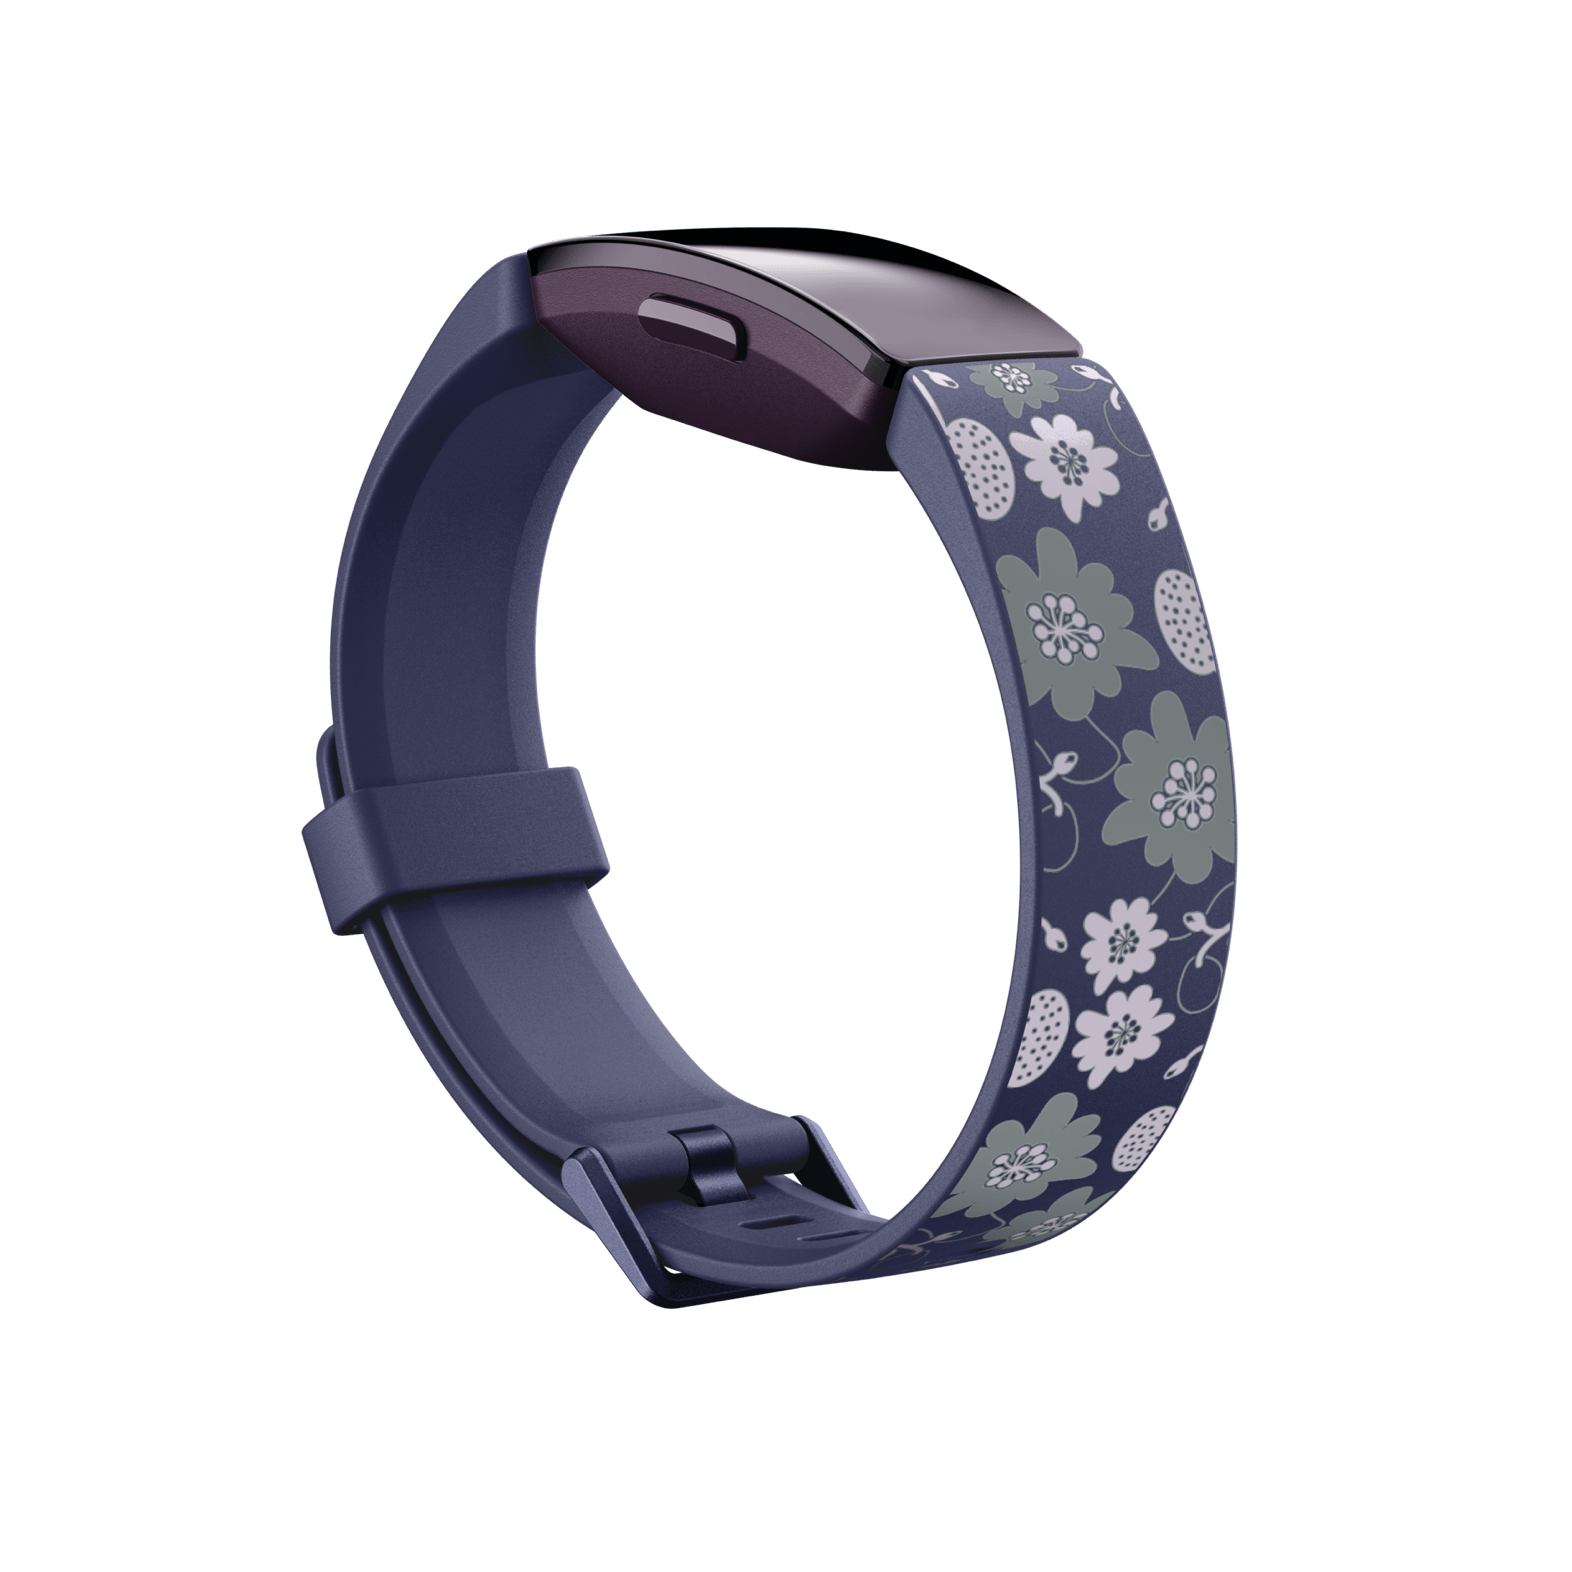 Inspire 2 fitbit Solved: Inspire